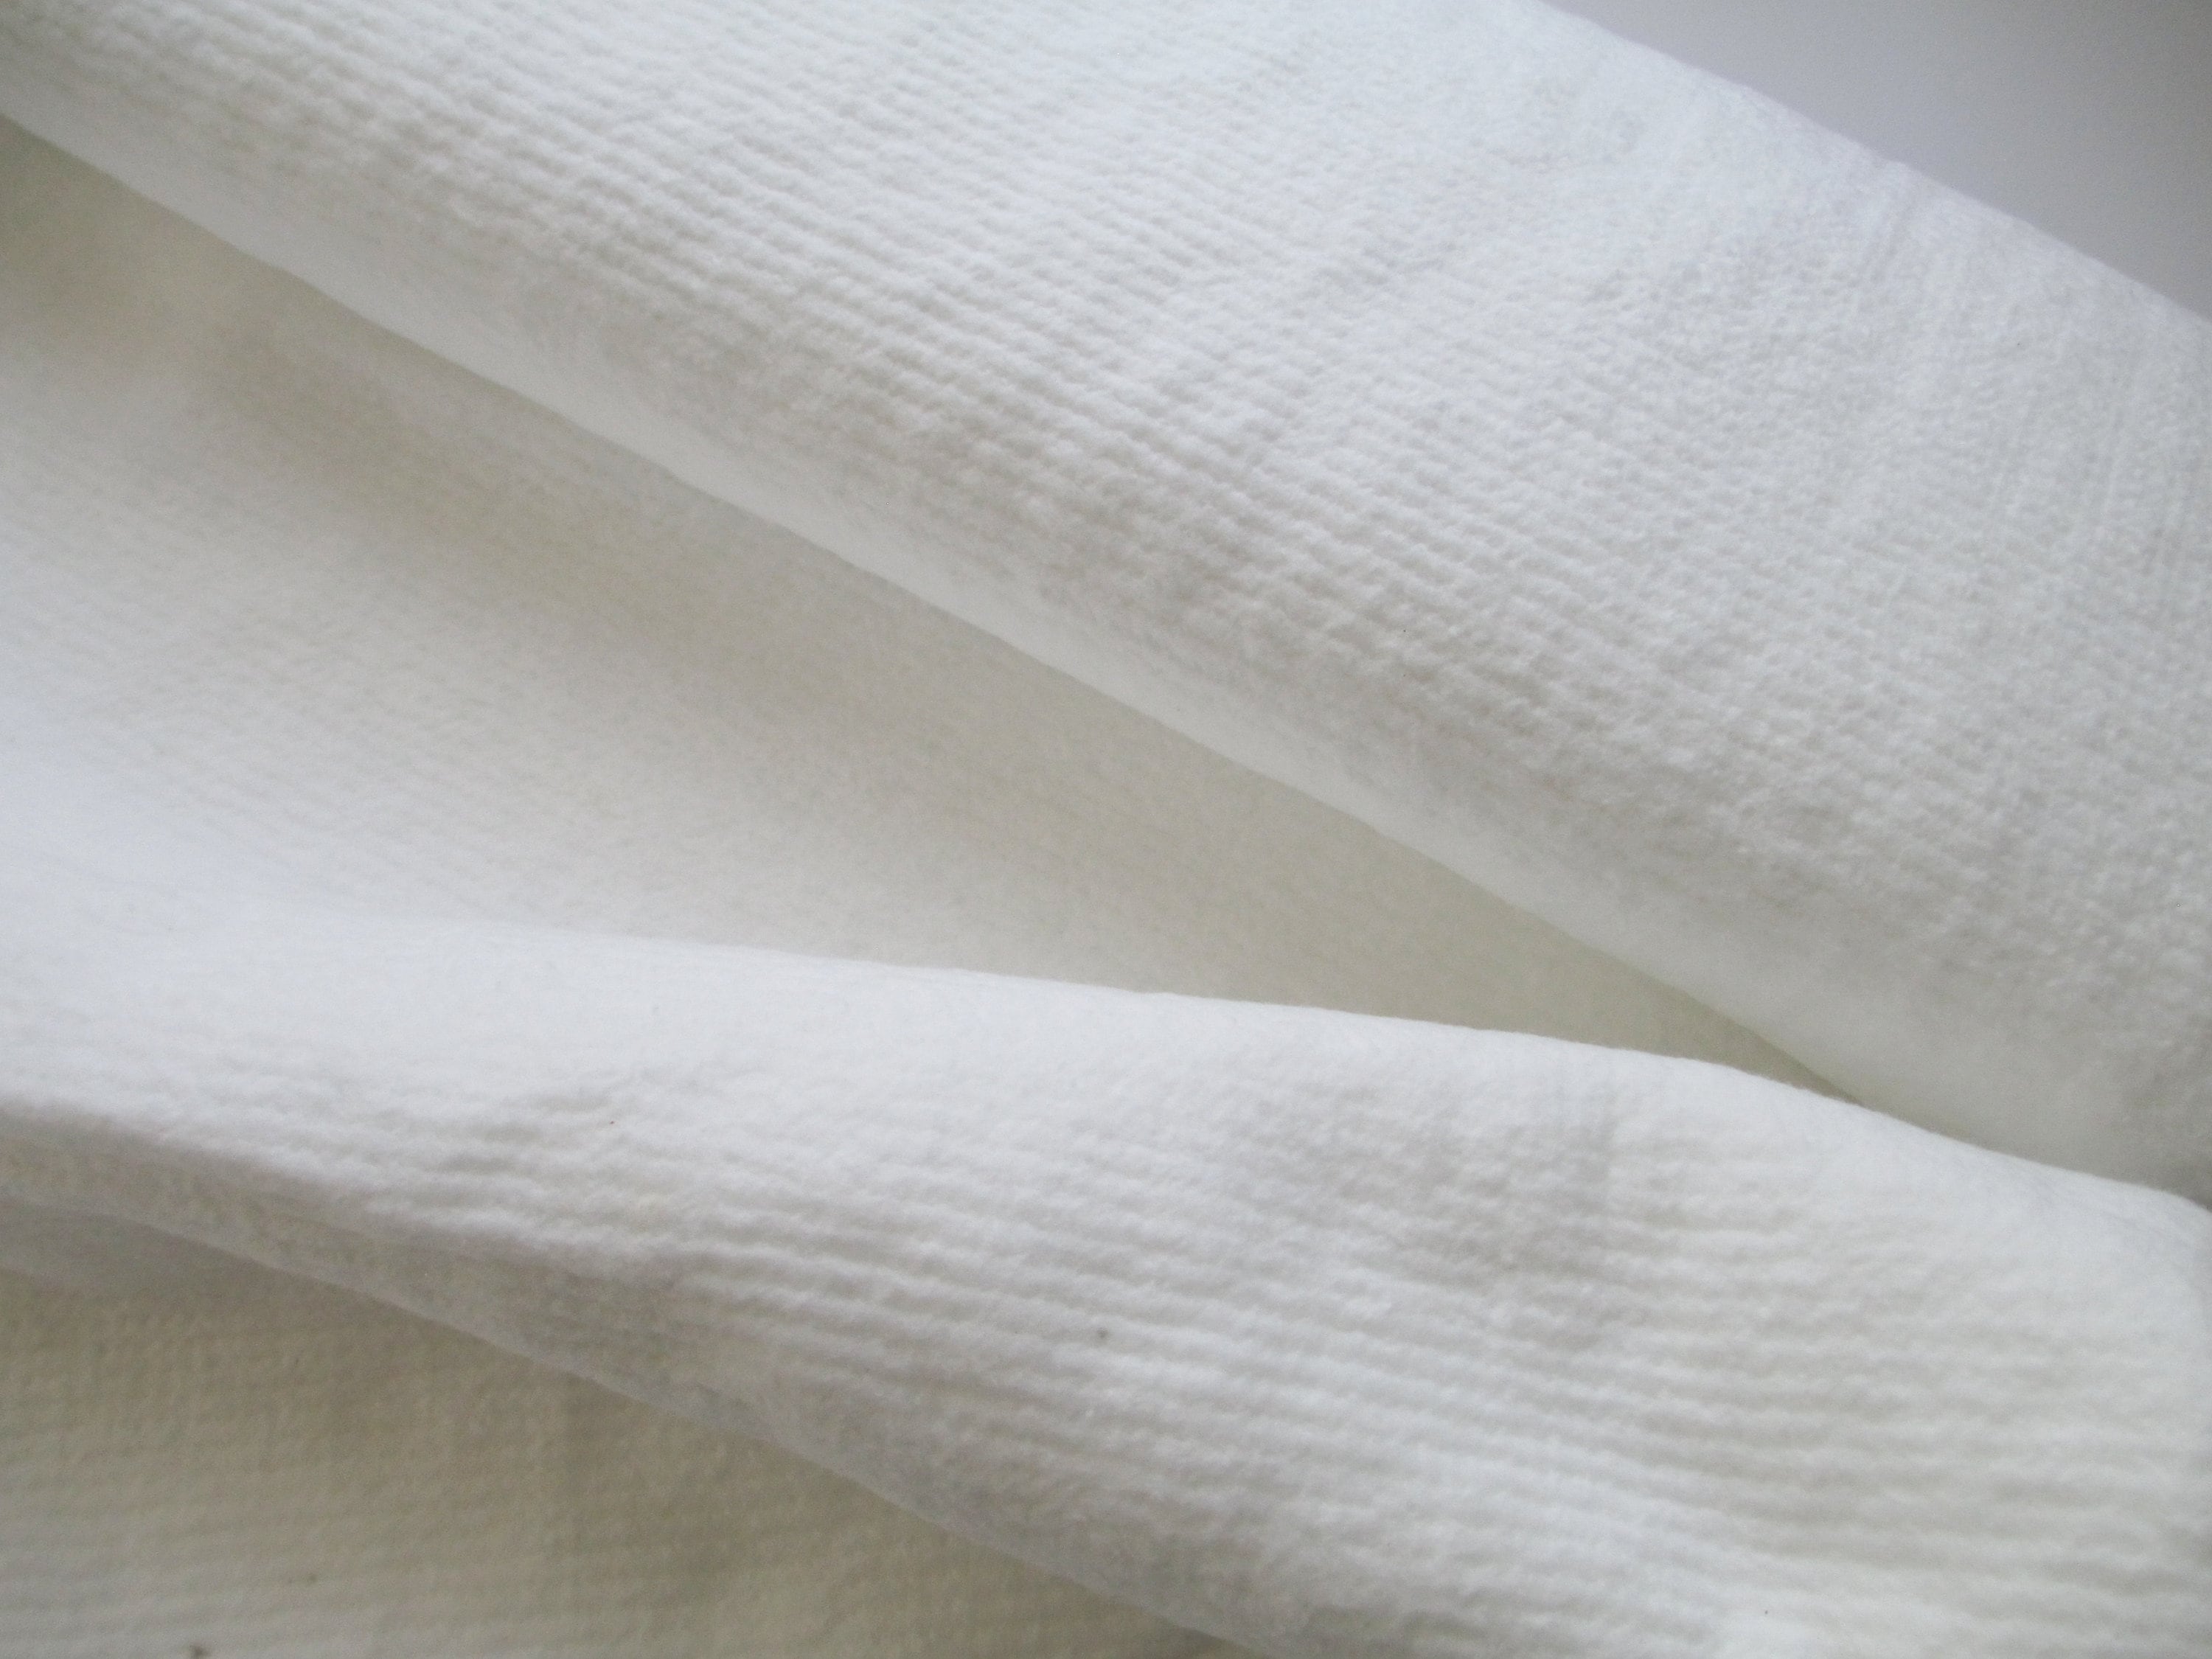 Pellon Nature's Touch Natural Cotton with Scrim Batting, 120 inch Wide, Size: 30 Yard Roll, Beige